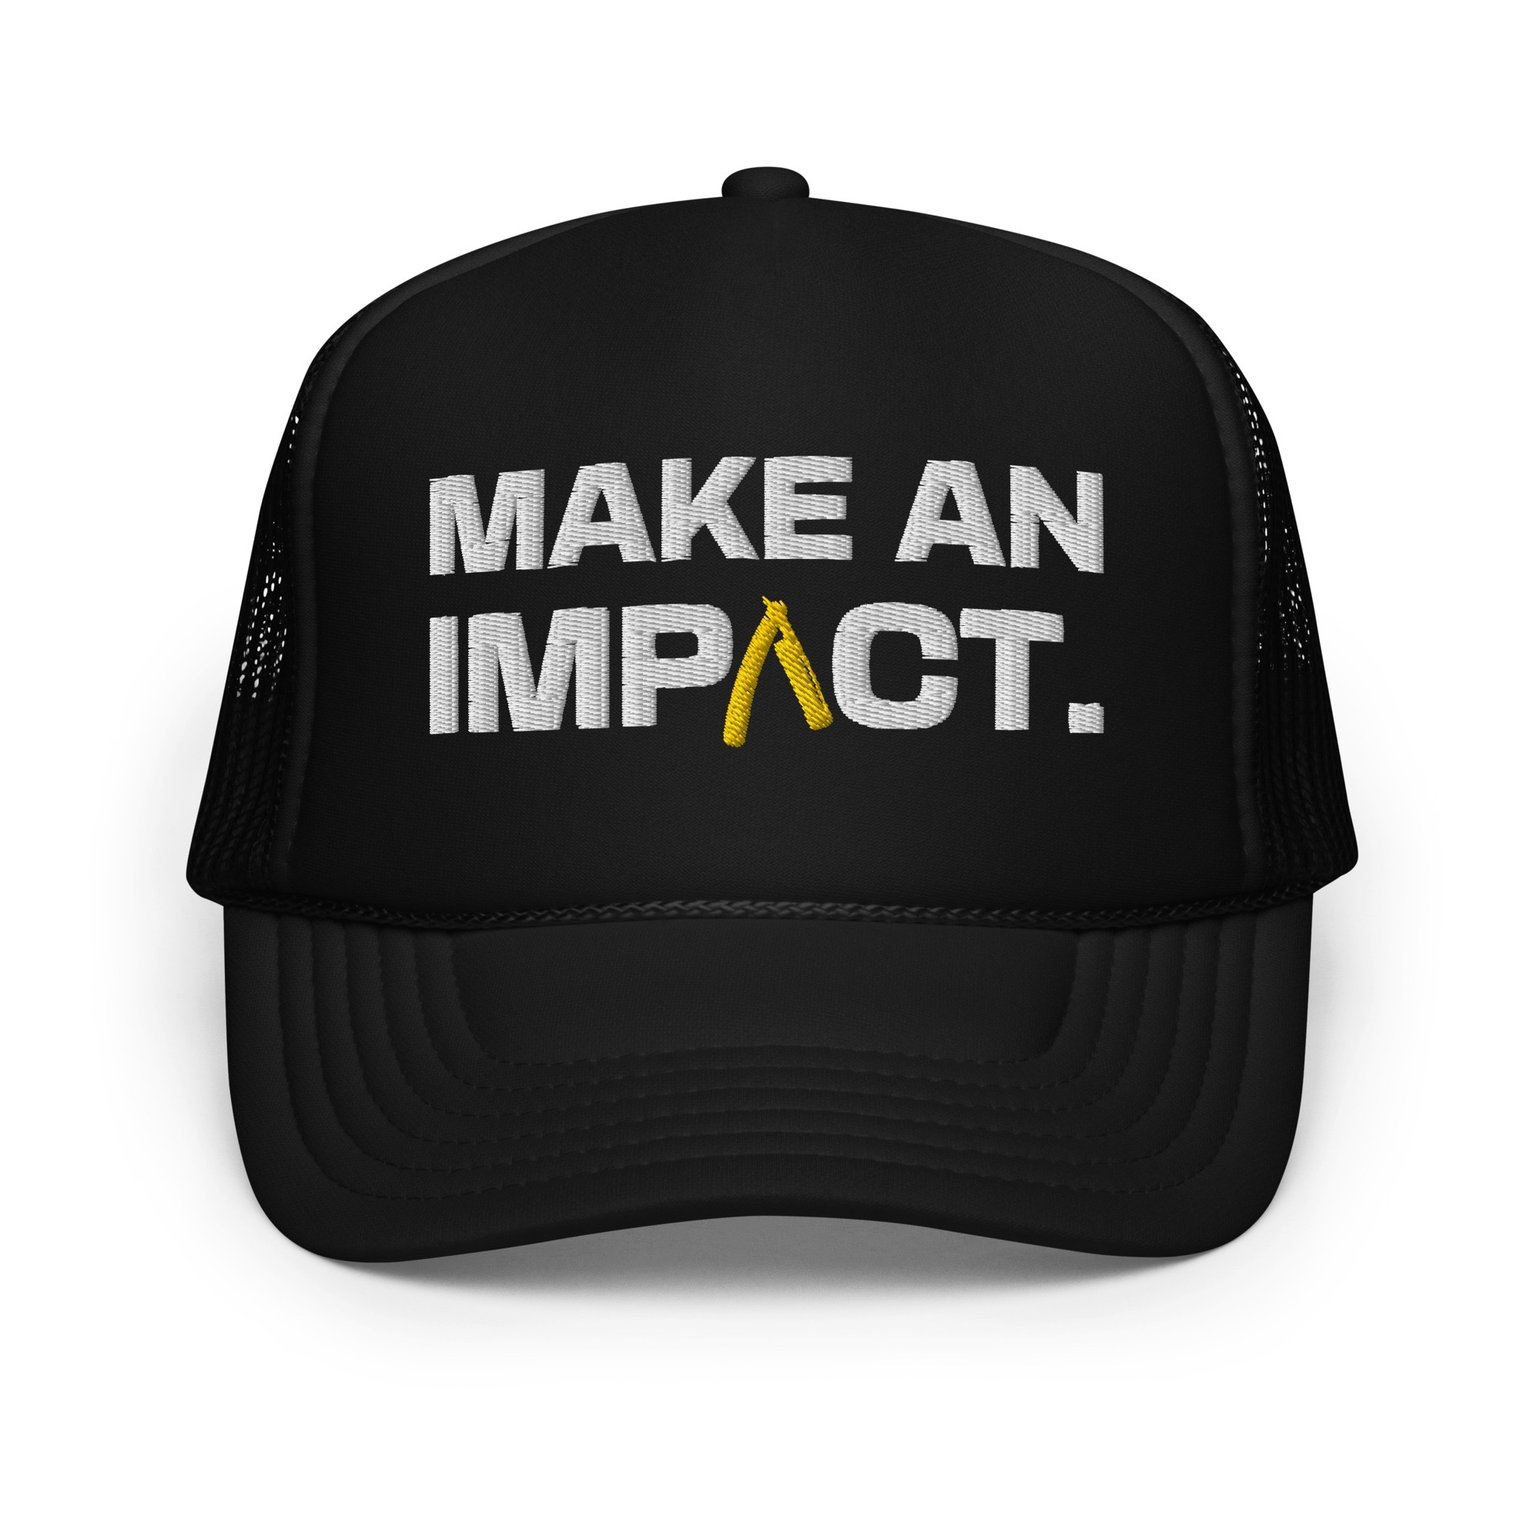 Image of "Make An Impact" Trucker Hat